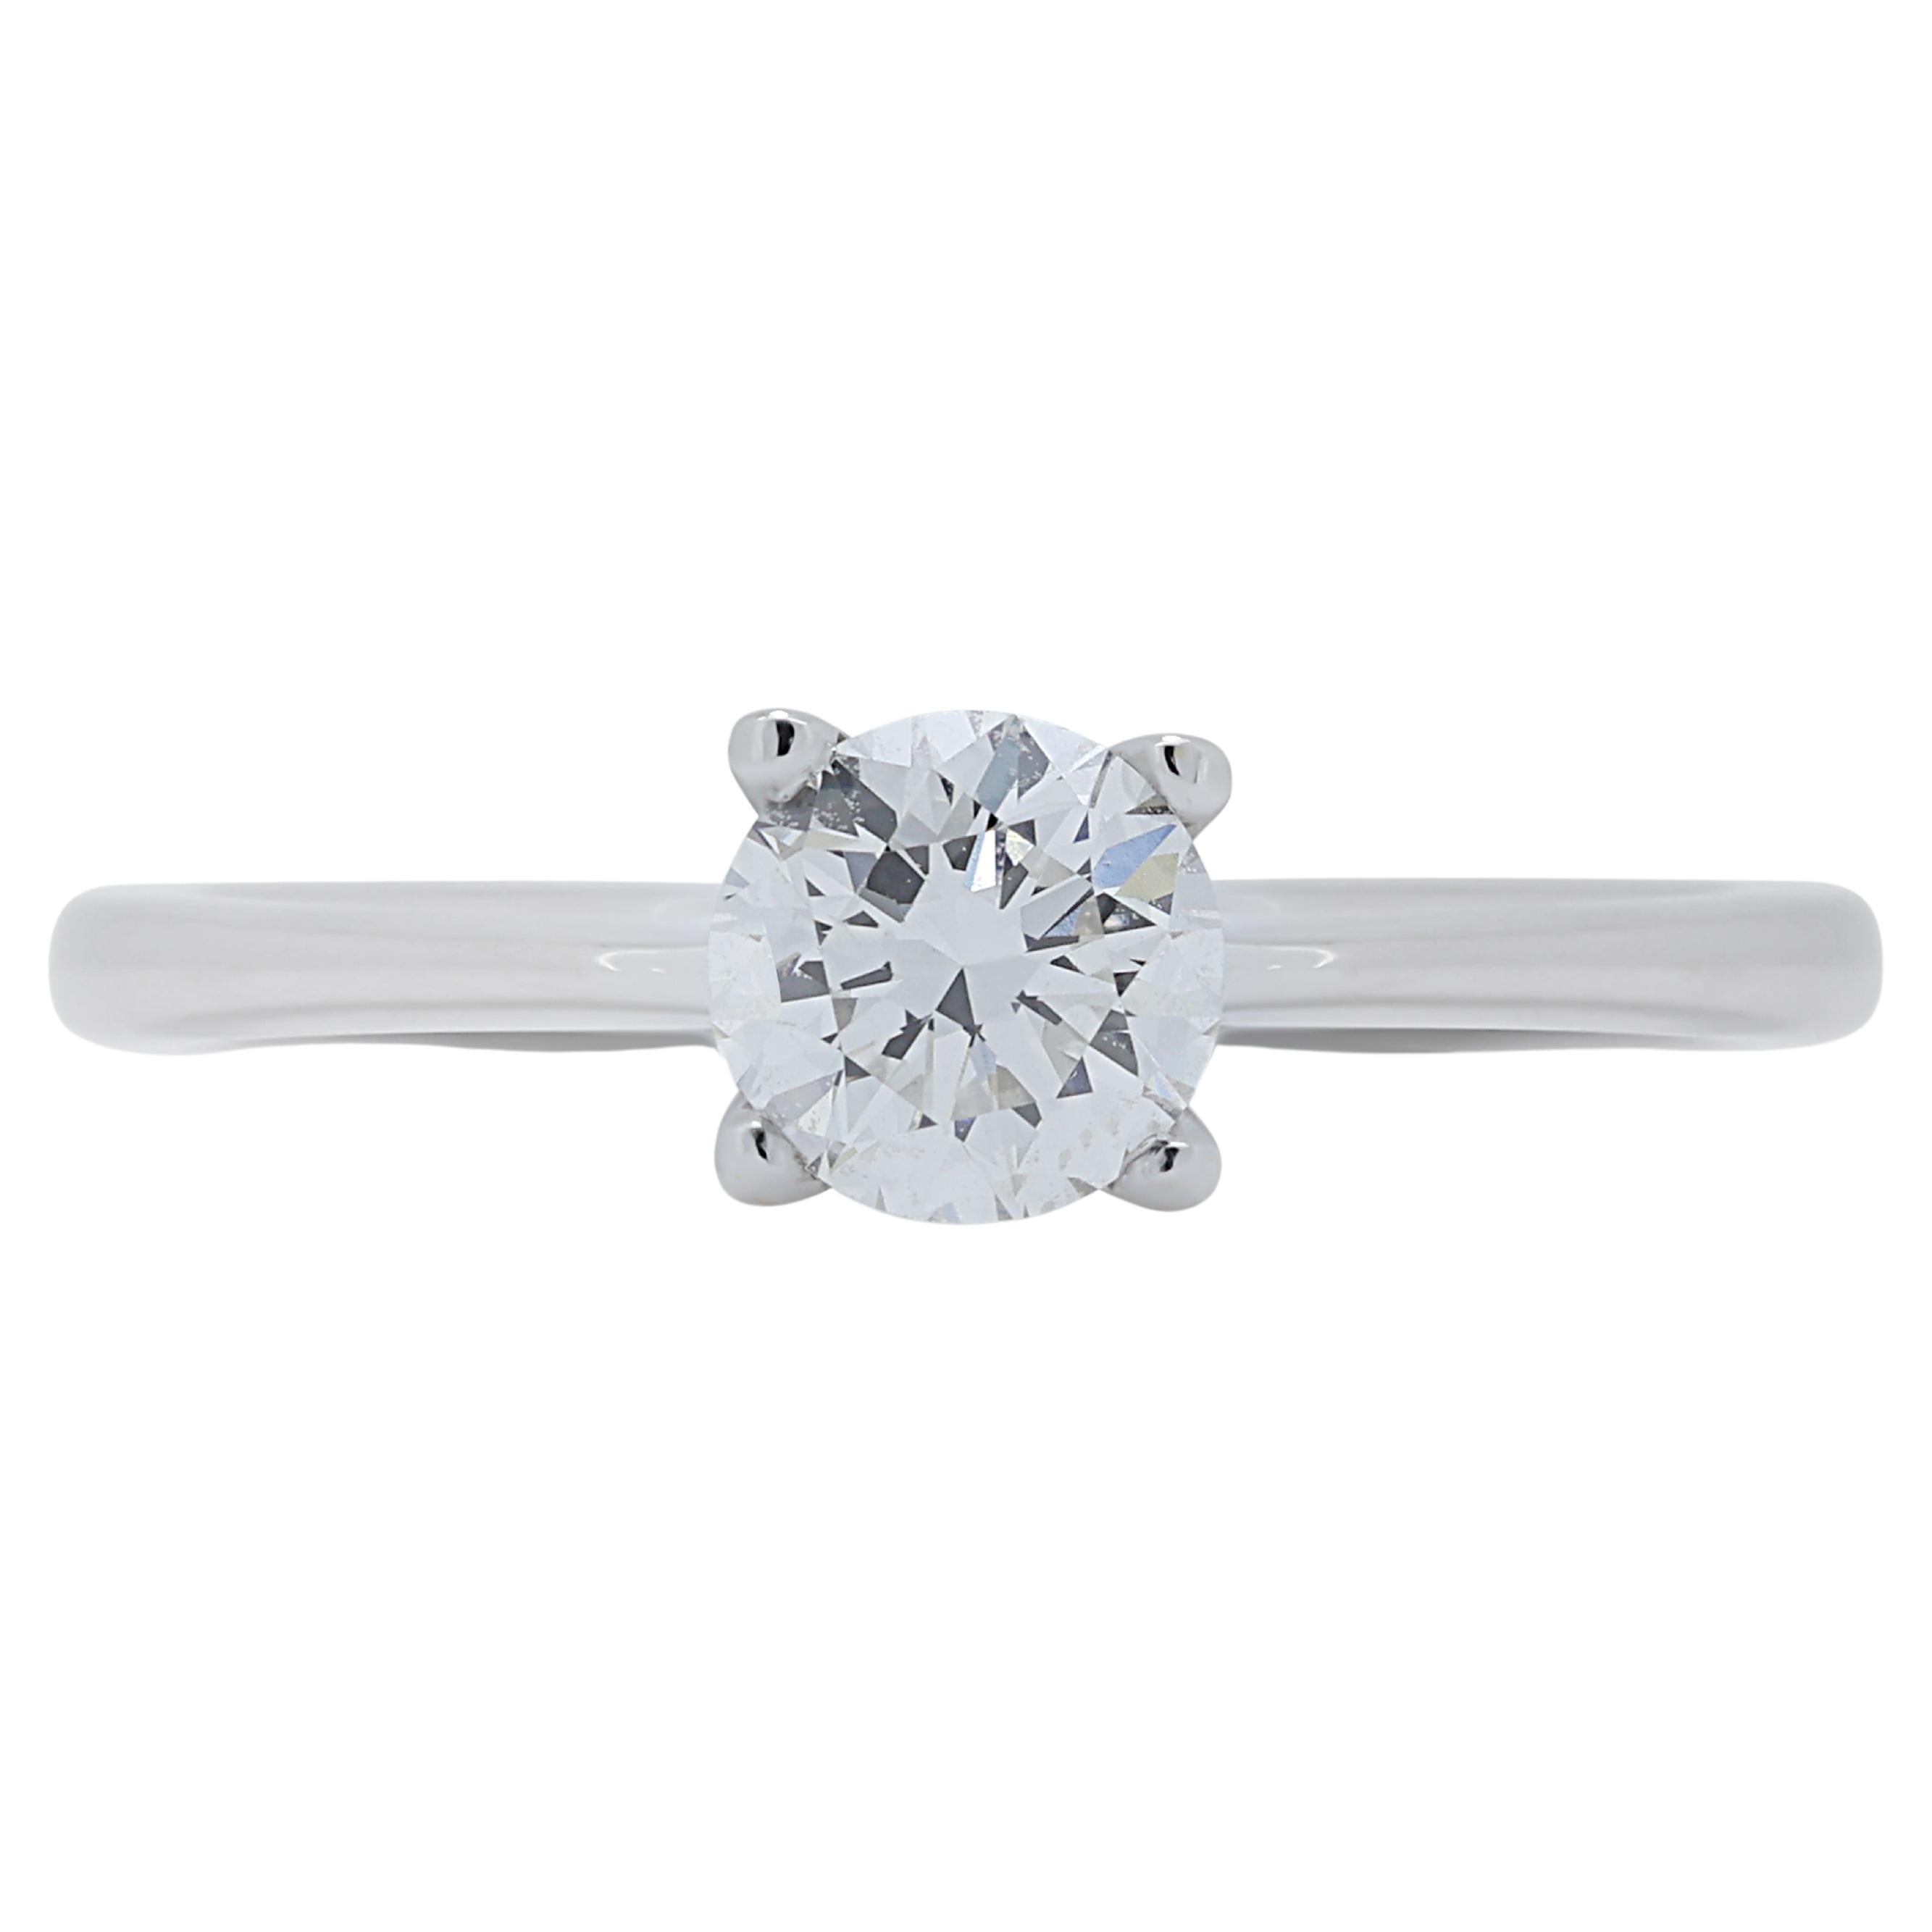 Timeless 0.32ct Diamond Solitaire Ring in 18K White Gold (Bague solitaire en or blanc 18 carats)  en vente